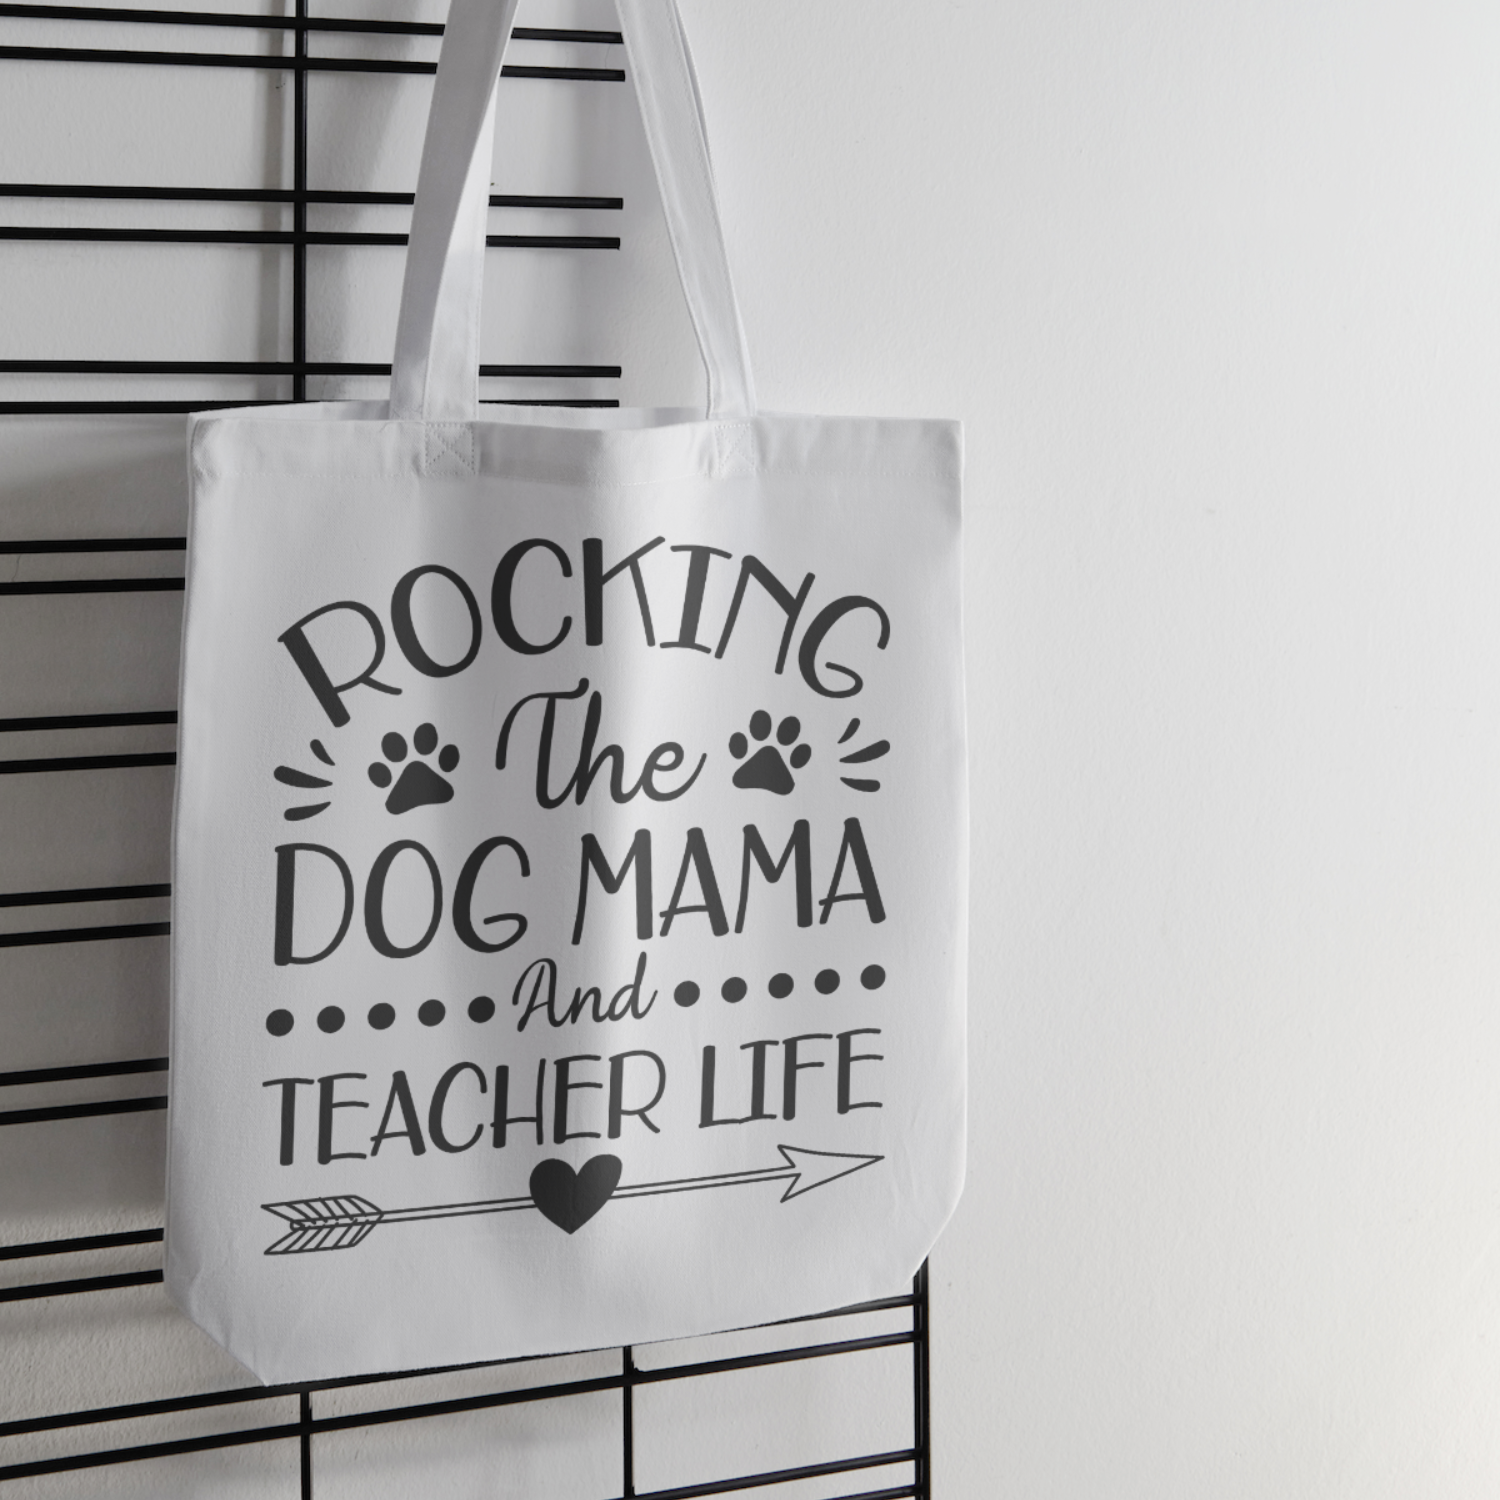 Rocking the dog mama and teacher life SVG | Digital Download | Cut File | SVG - Only The Sweet Stuff